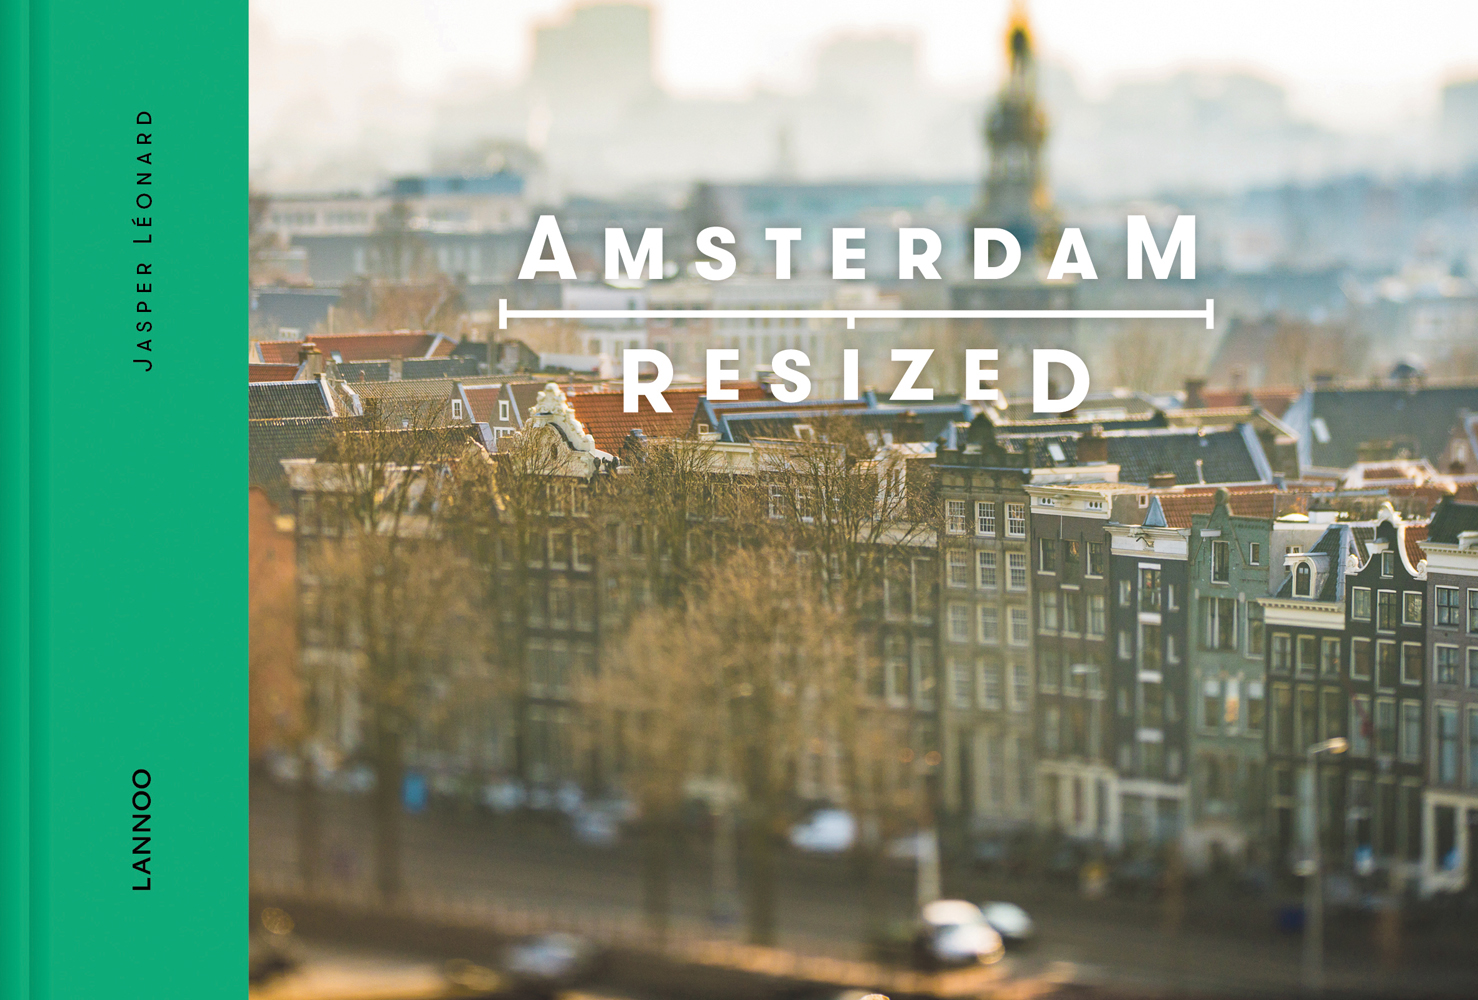 Special tilt-shift lens creating a miniature model effect of a residential street lined with trees, on cover of ' Amsterdam Resized', by Lannoo Publishers.